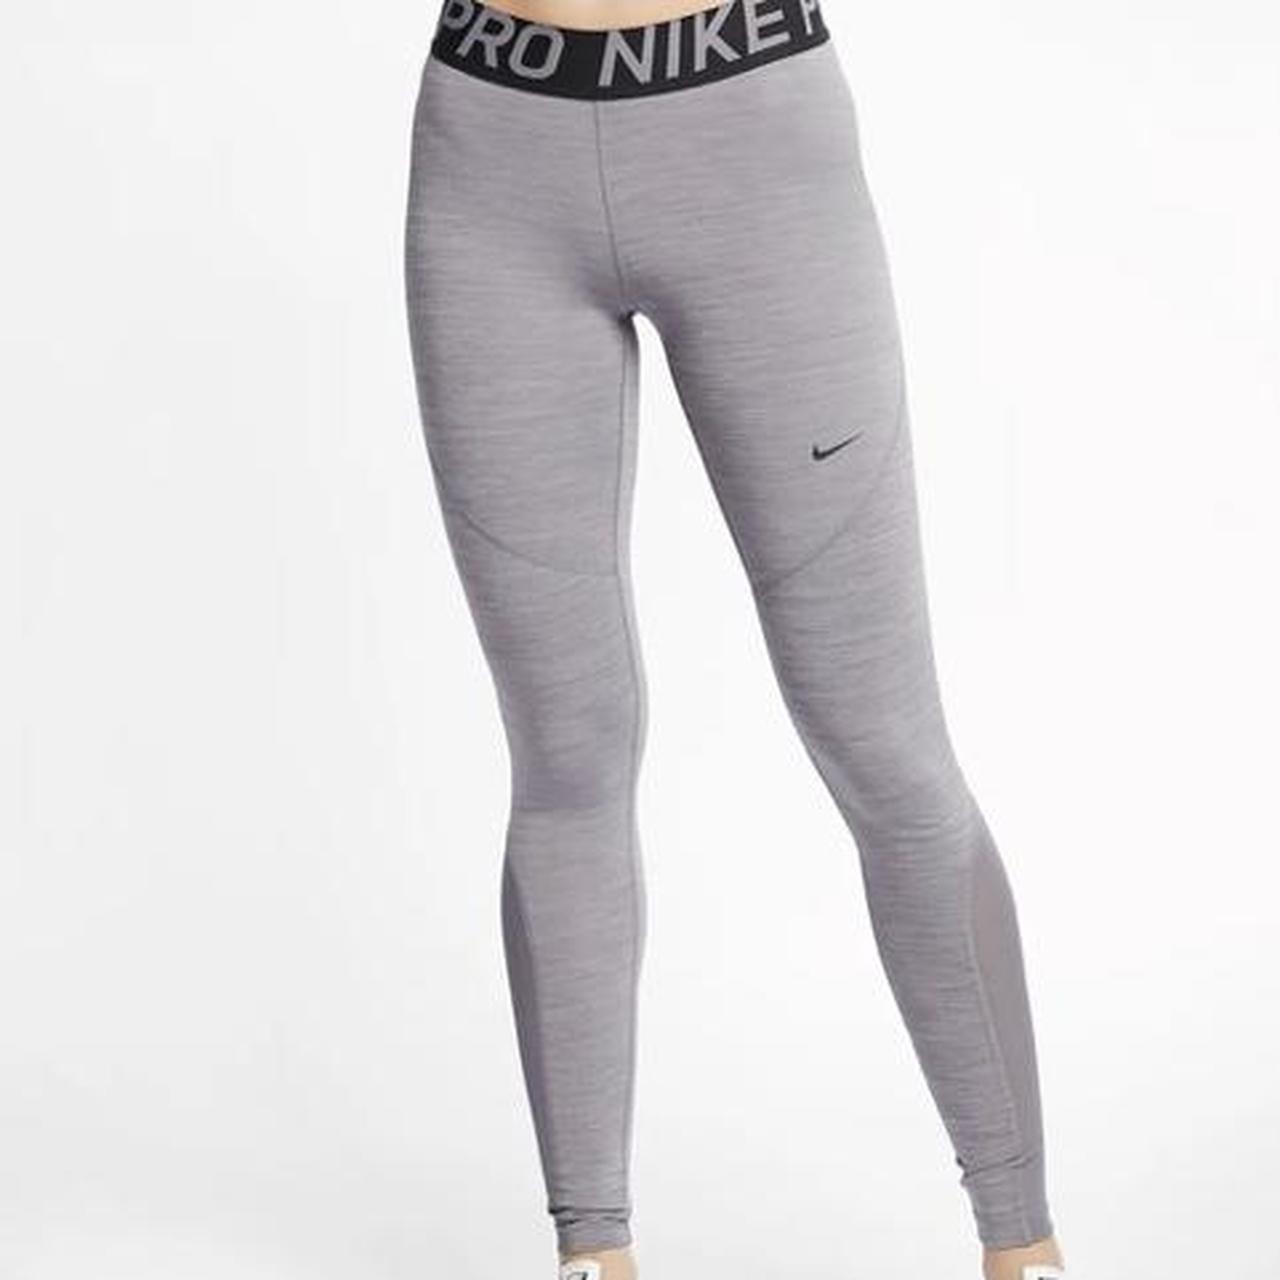 Nike leggings with mesh down the leg. Bought off - Depop